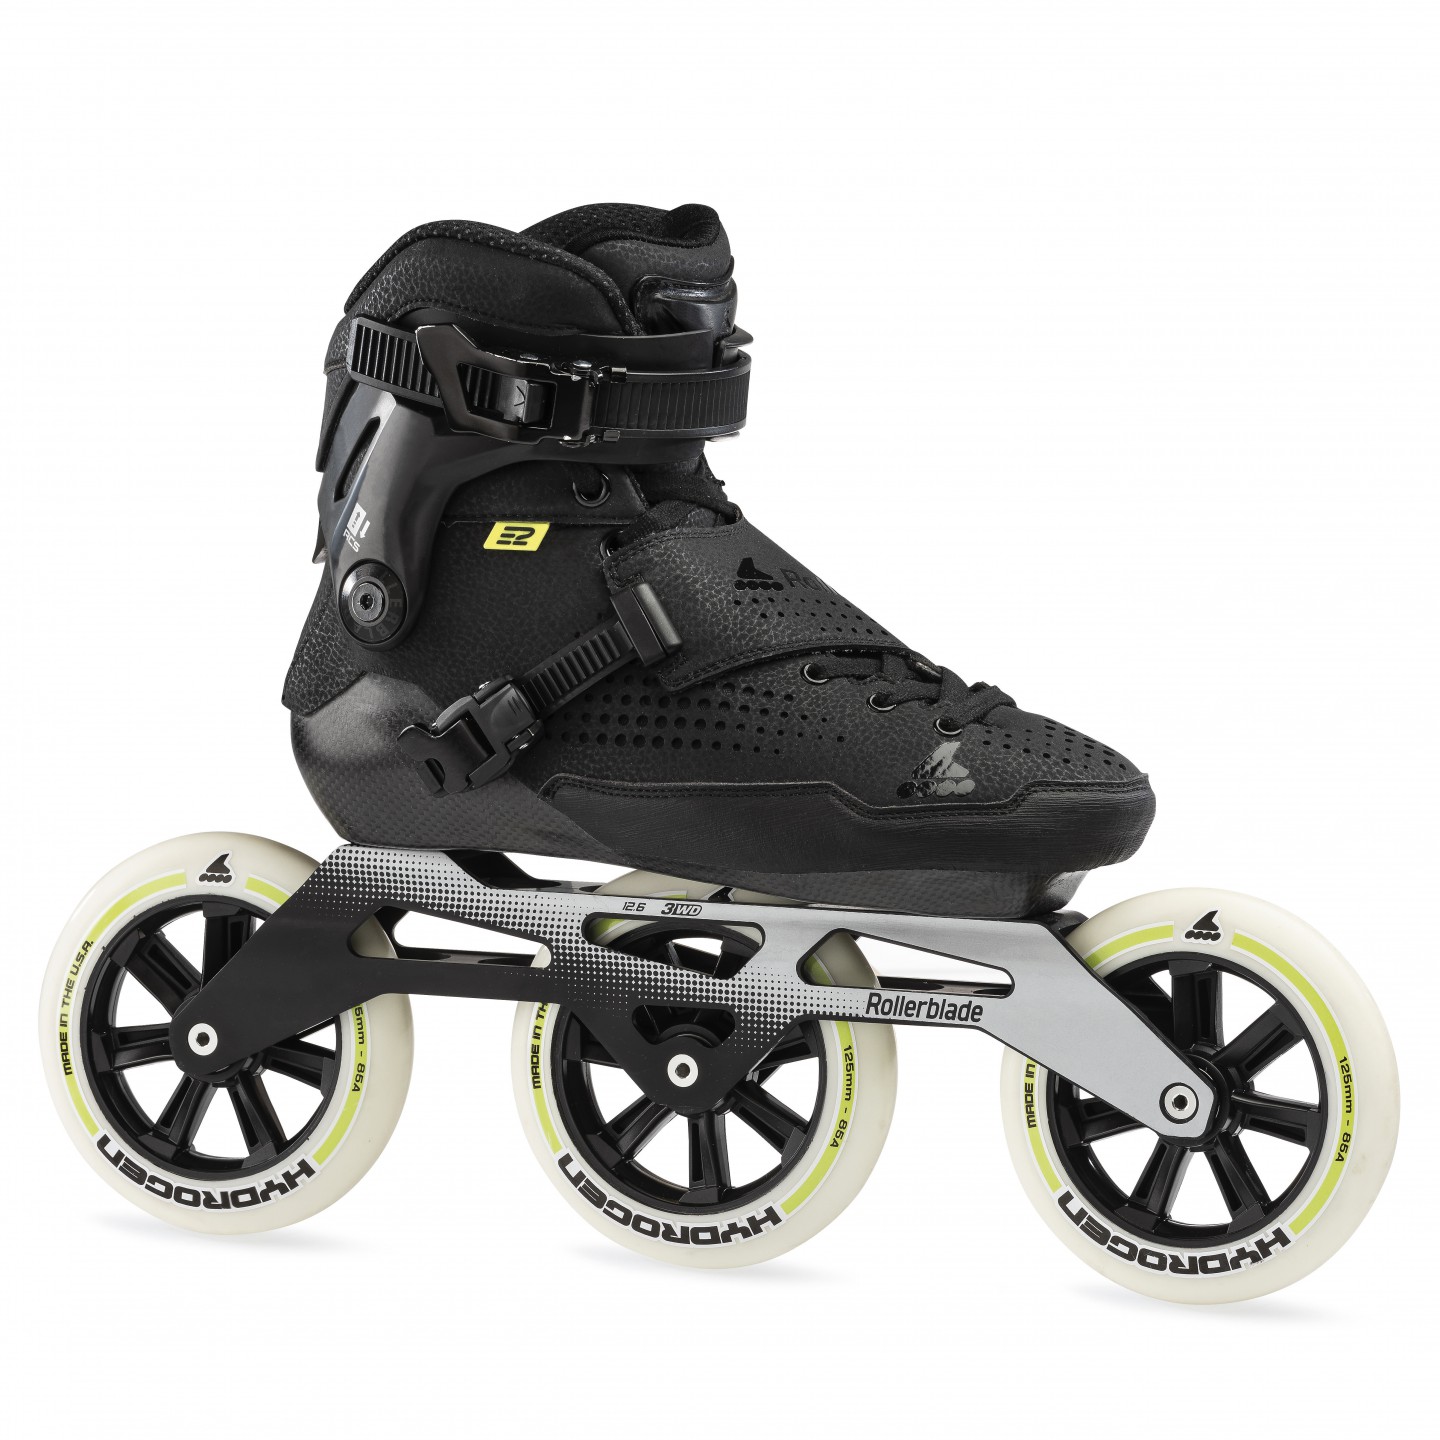 Rollerblade E2 Pro with 125 mm Hydrogen wheels